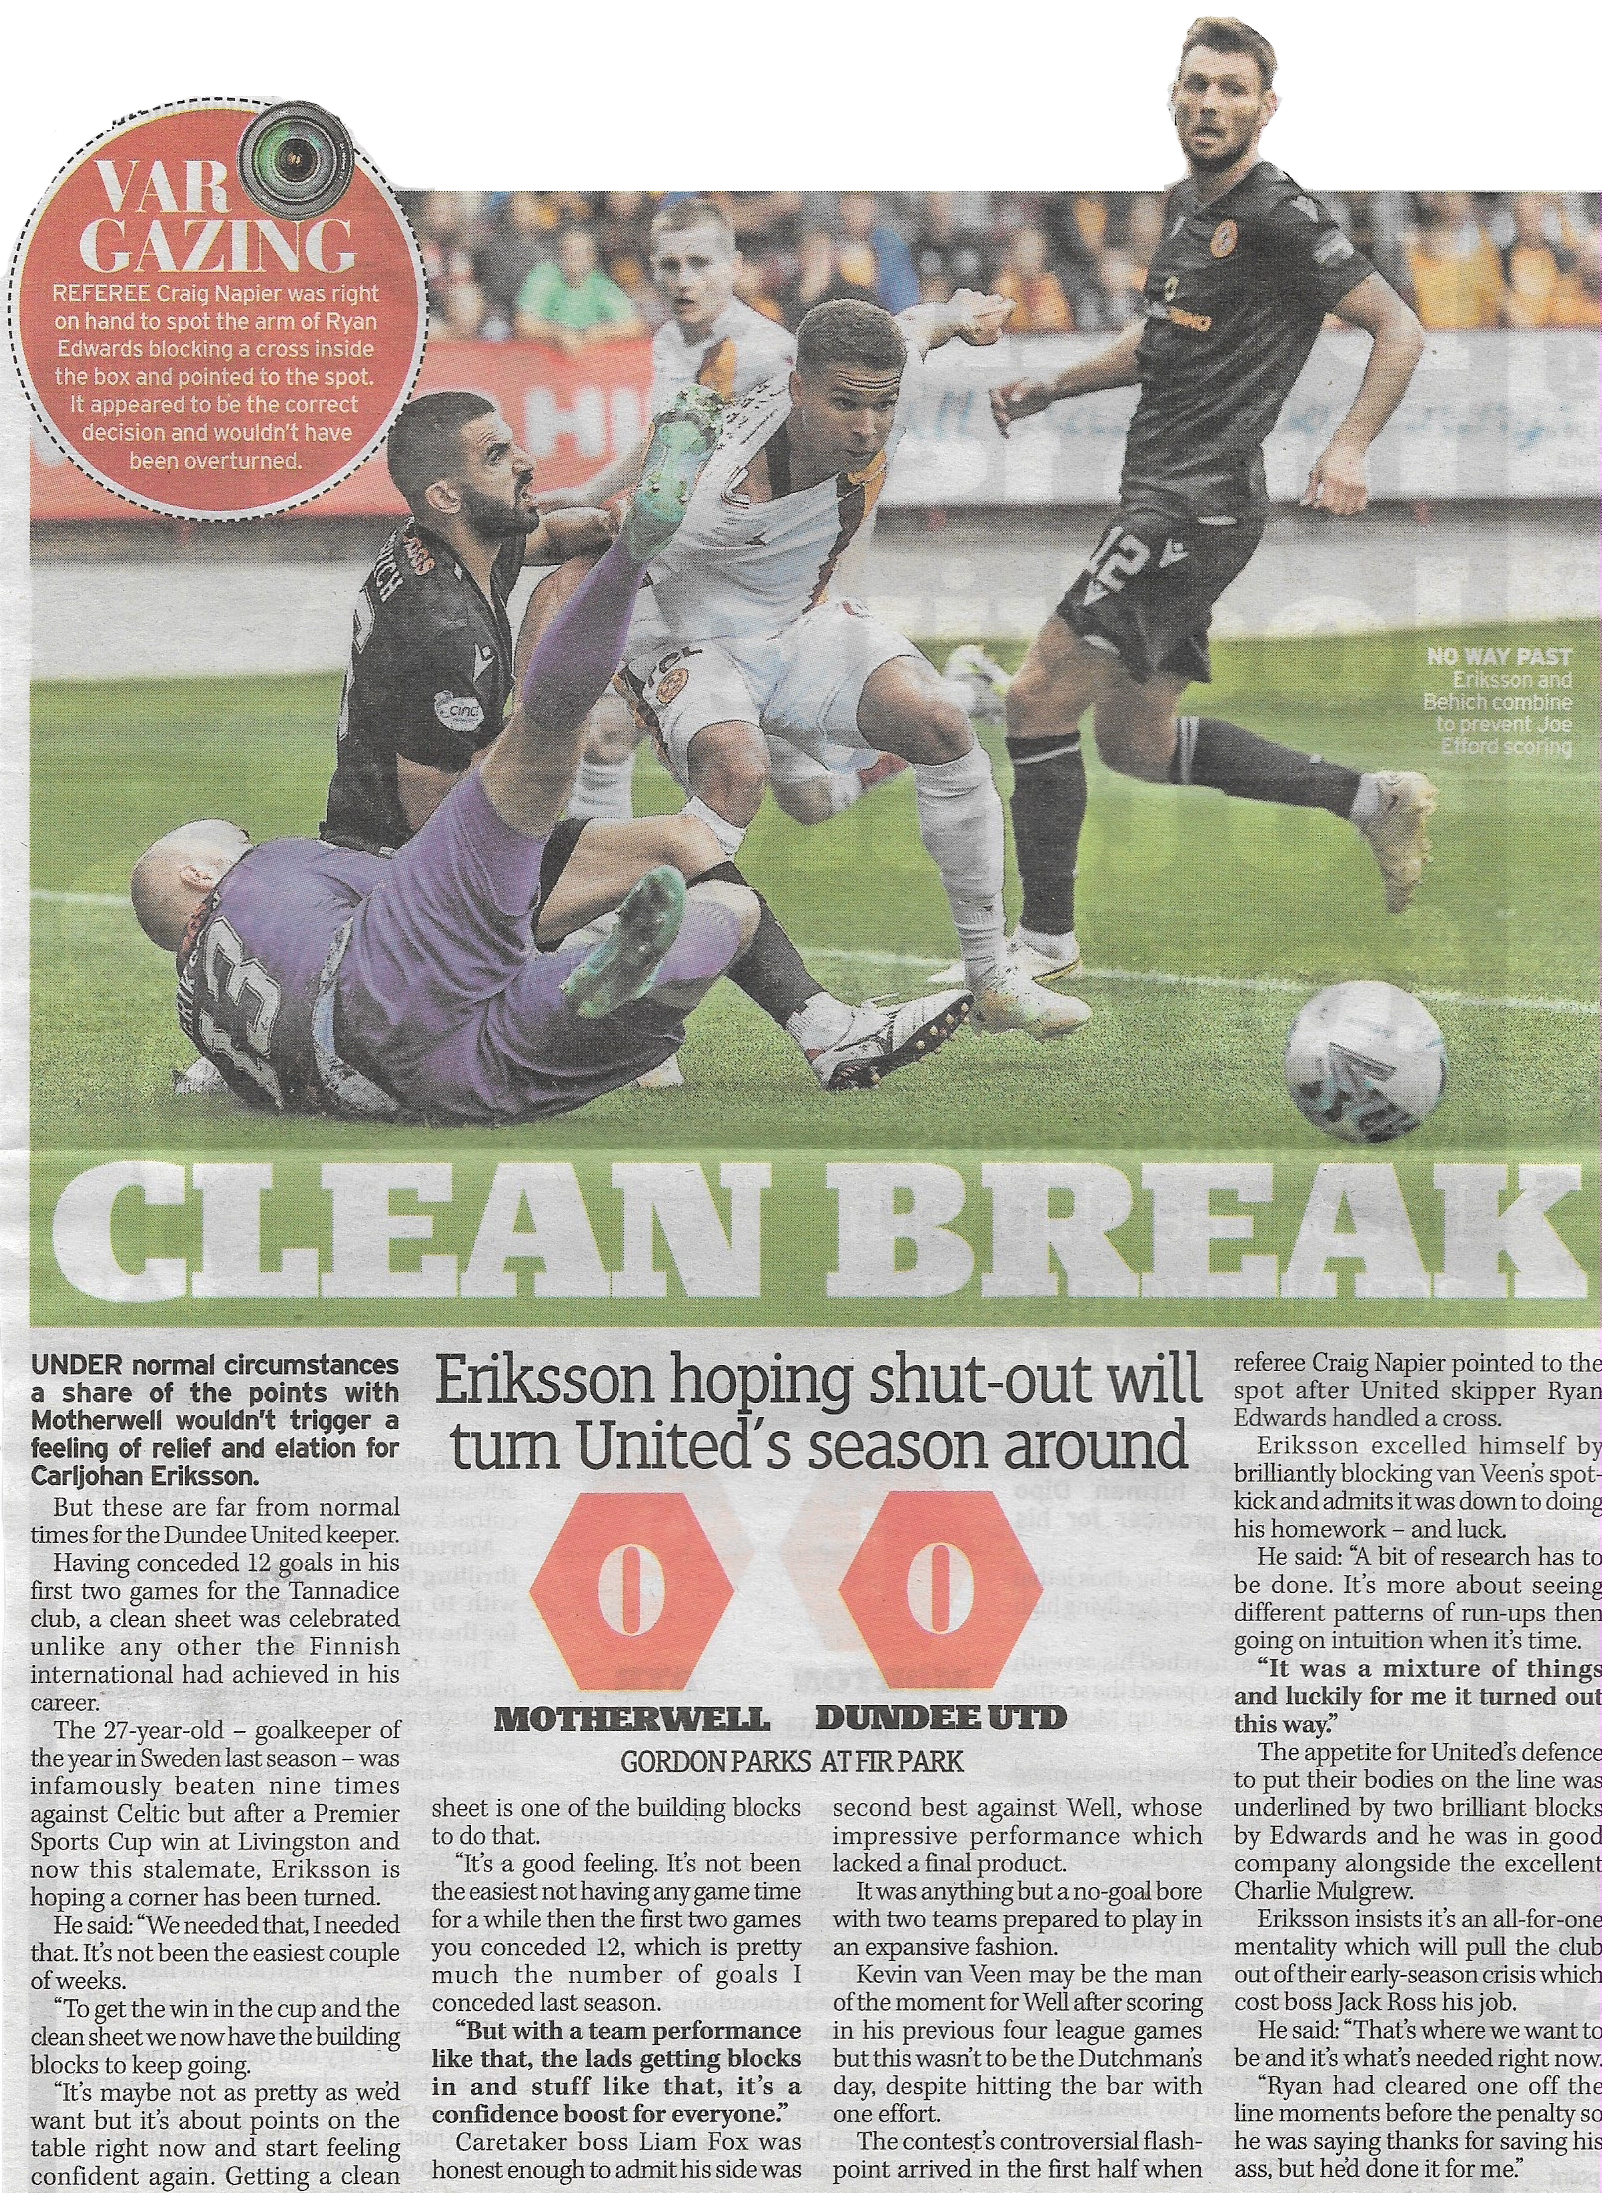 Motherwell vs Dundee United Newspaper Match Report